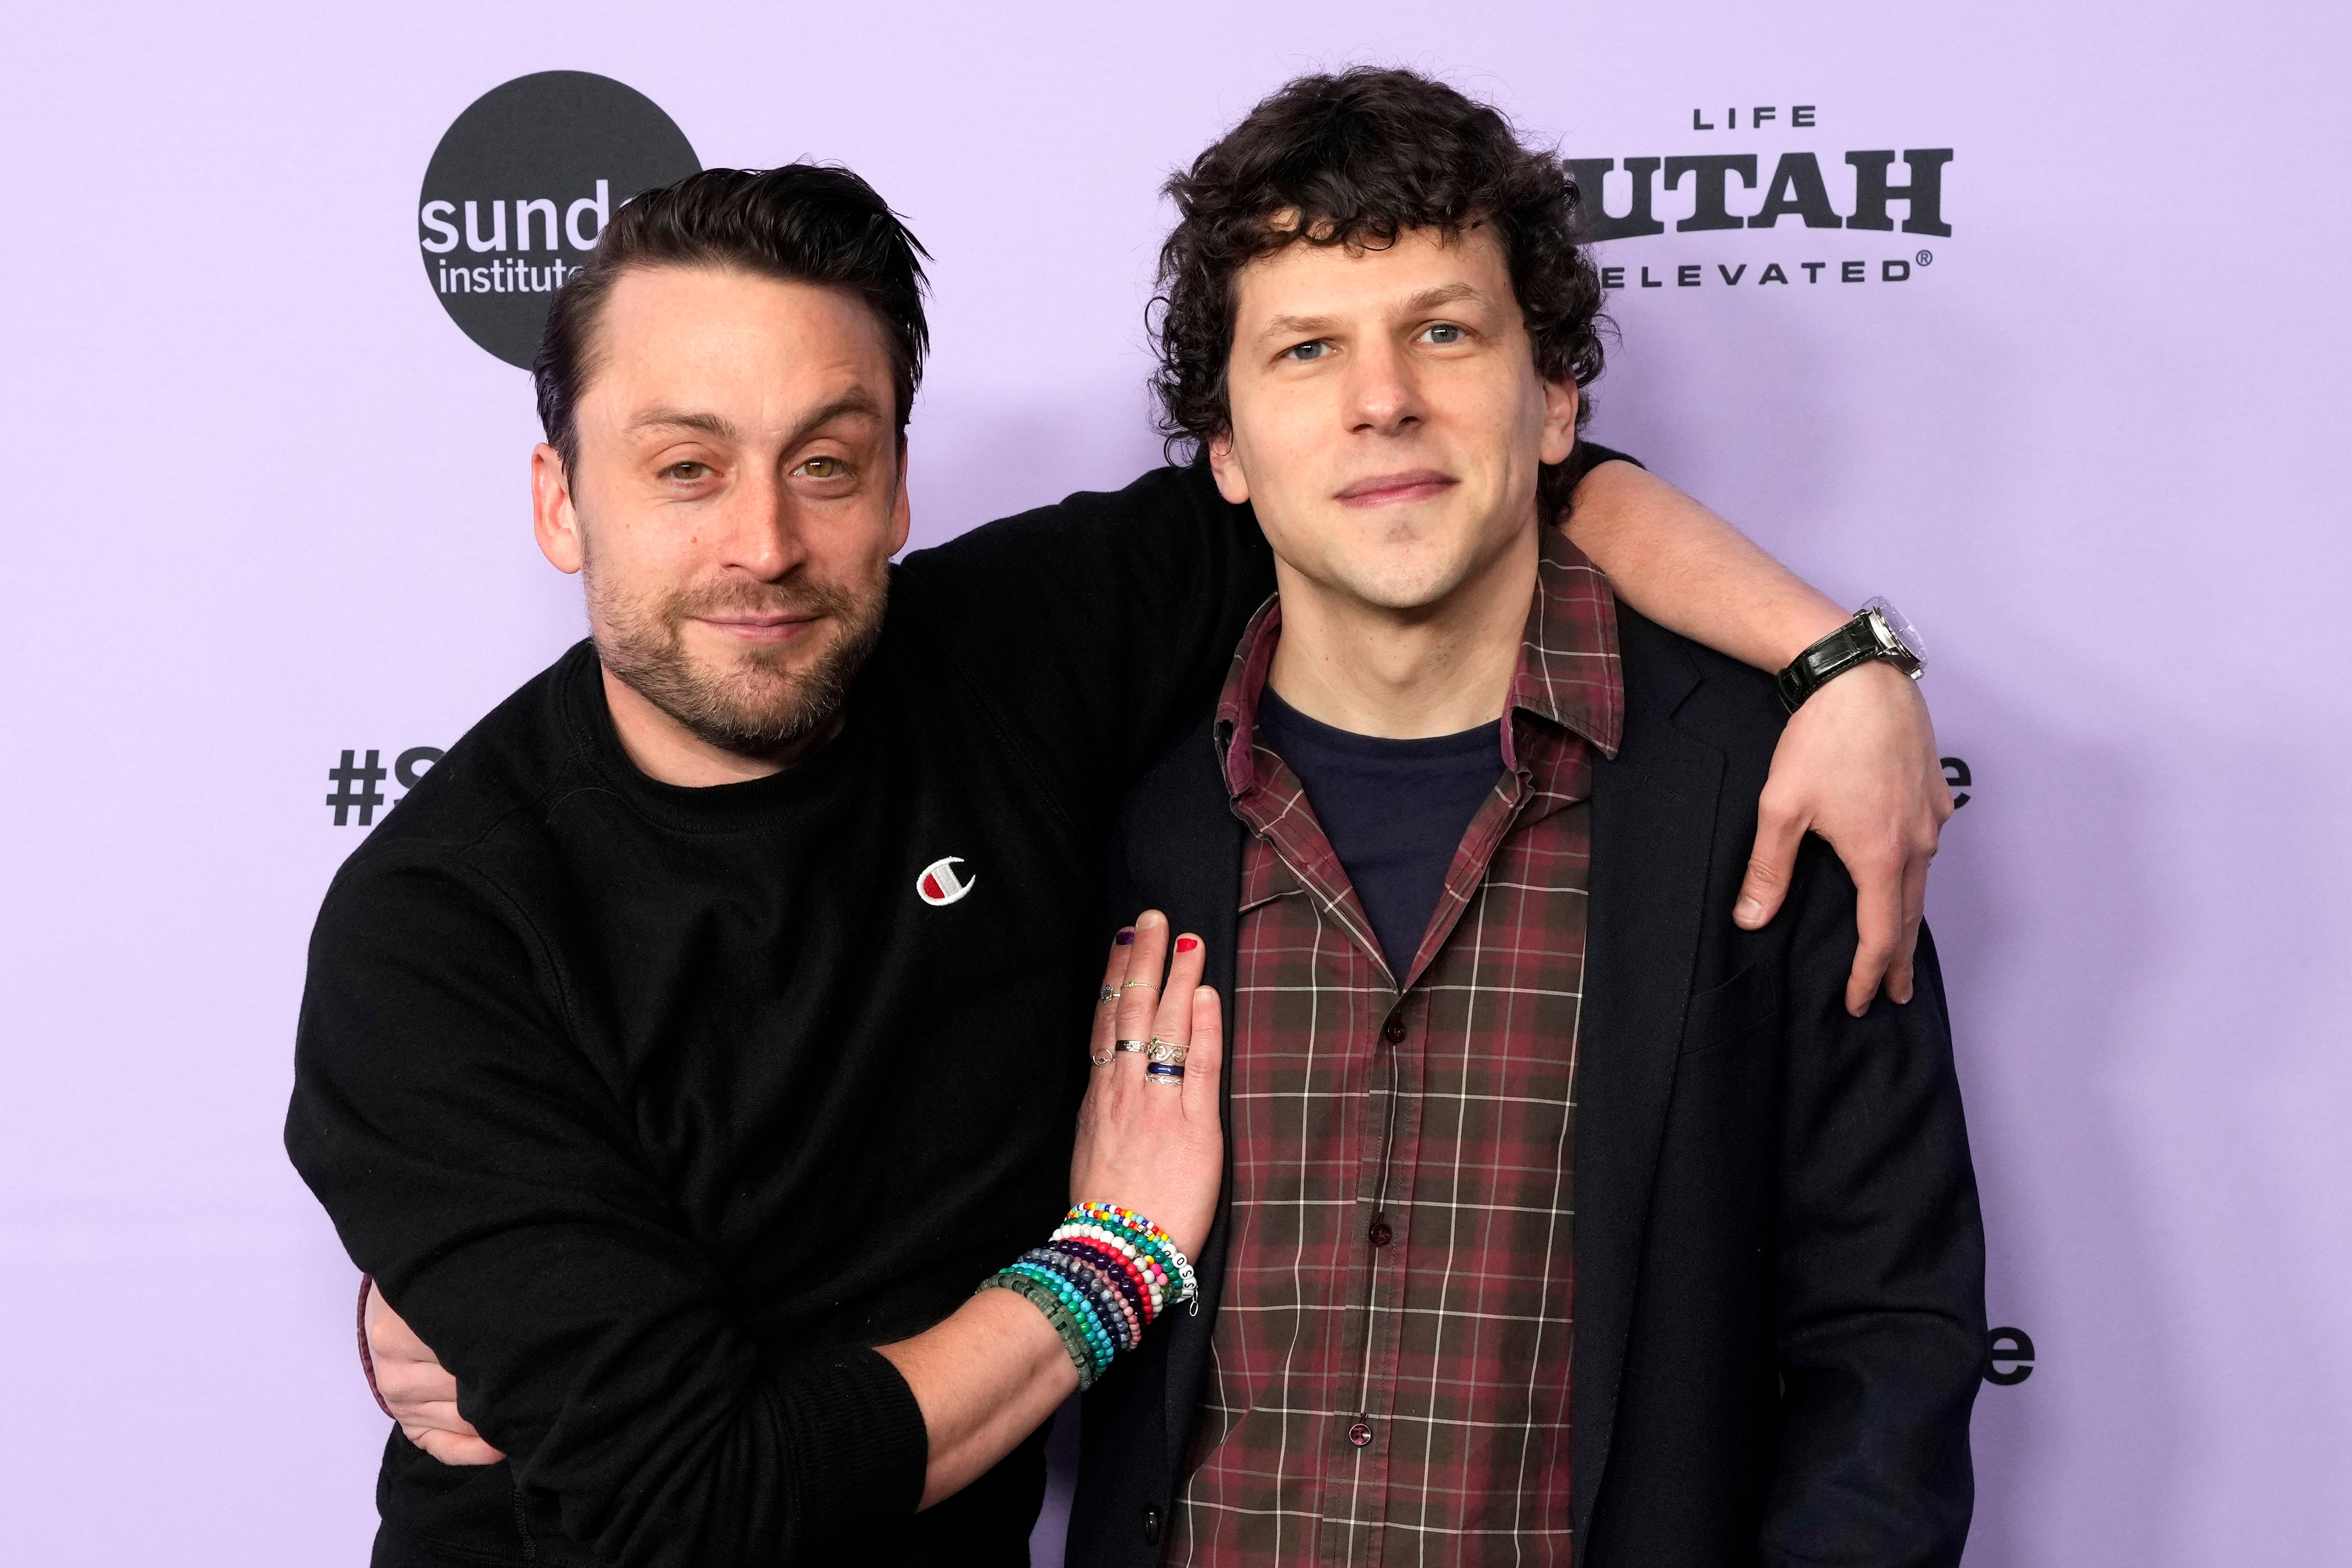 Kieran Culkin, left, and Jesse Eisenberg attend the premiere of “A Real Pain” at the Eccles Theatre